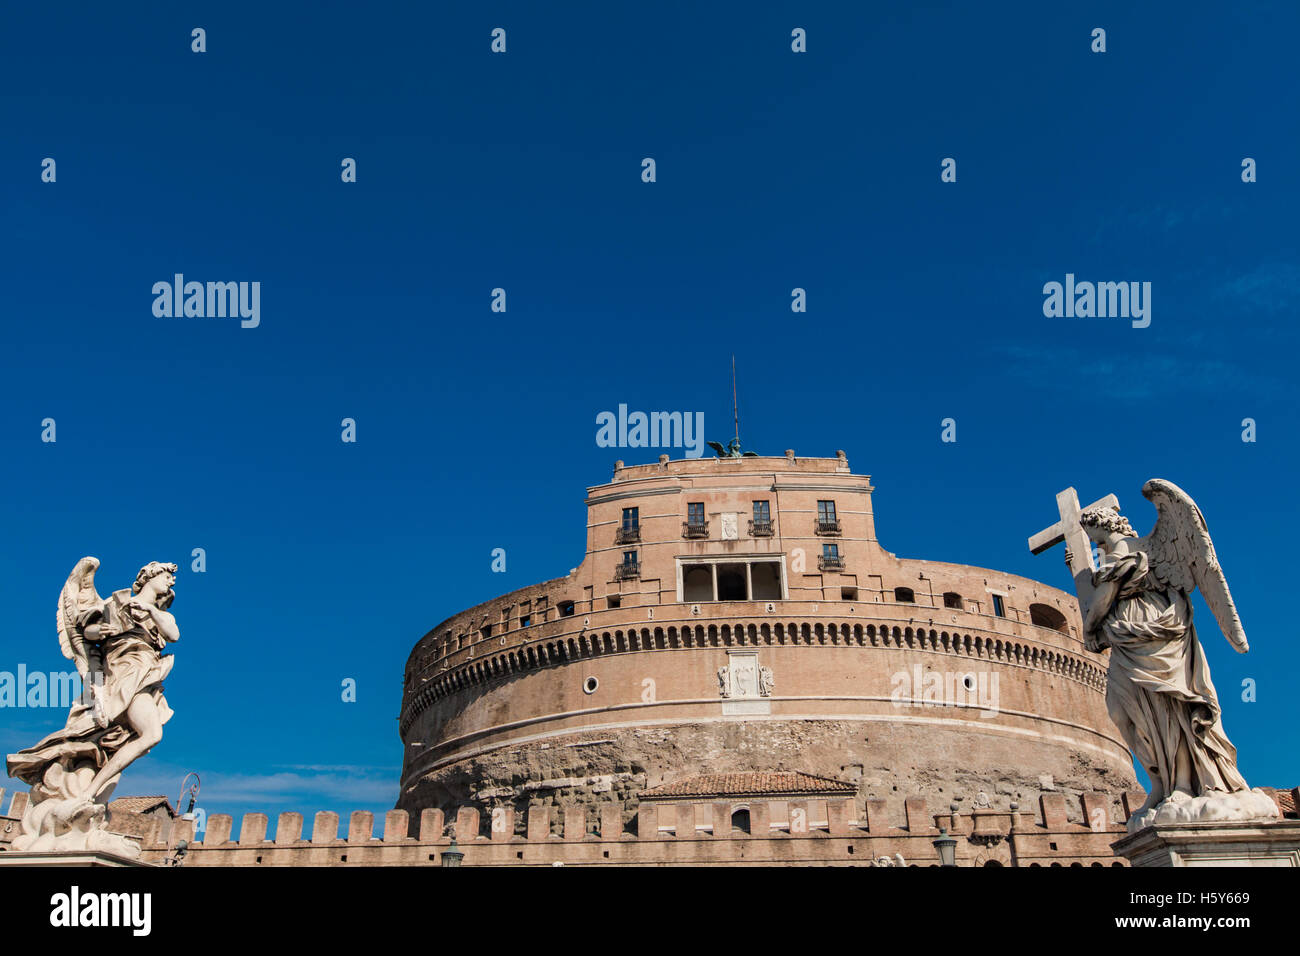 View at Castel Sant' Angelo, Rome, Italy Stock Photo